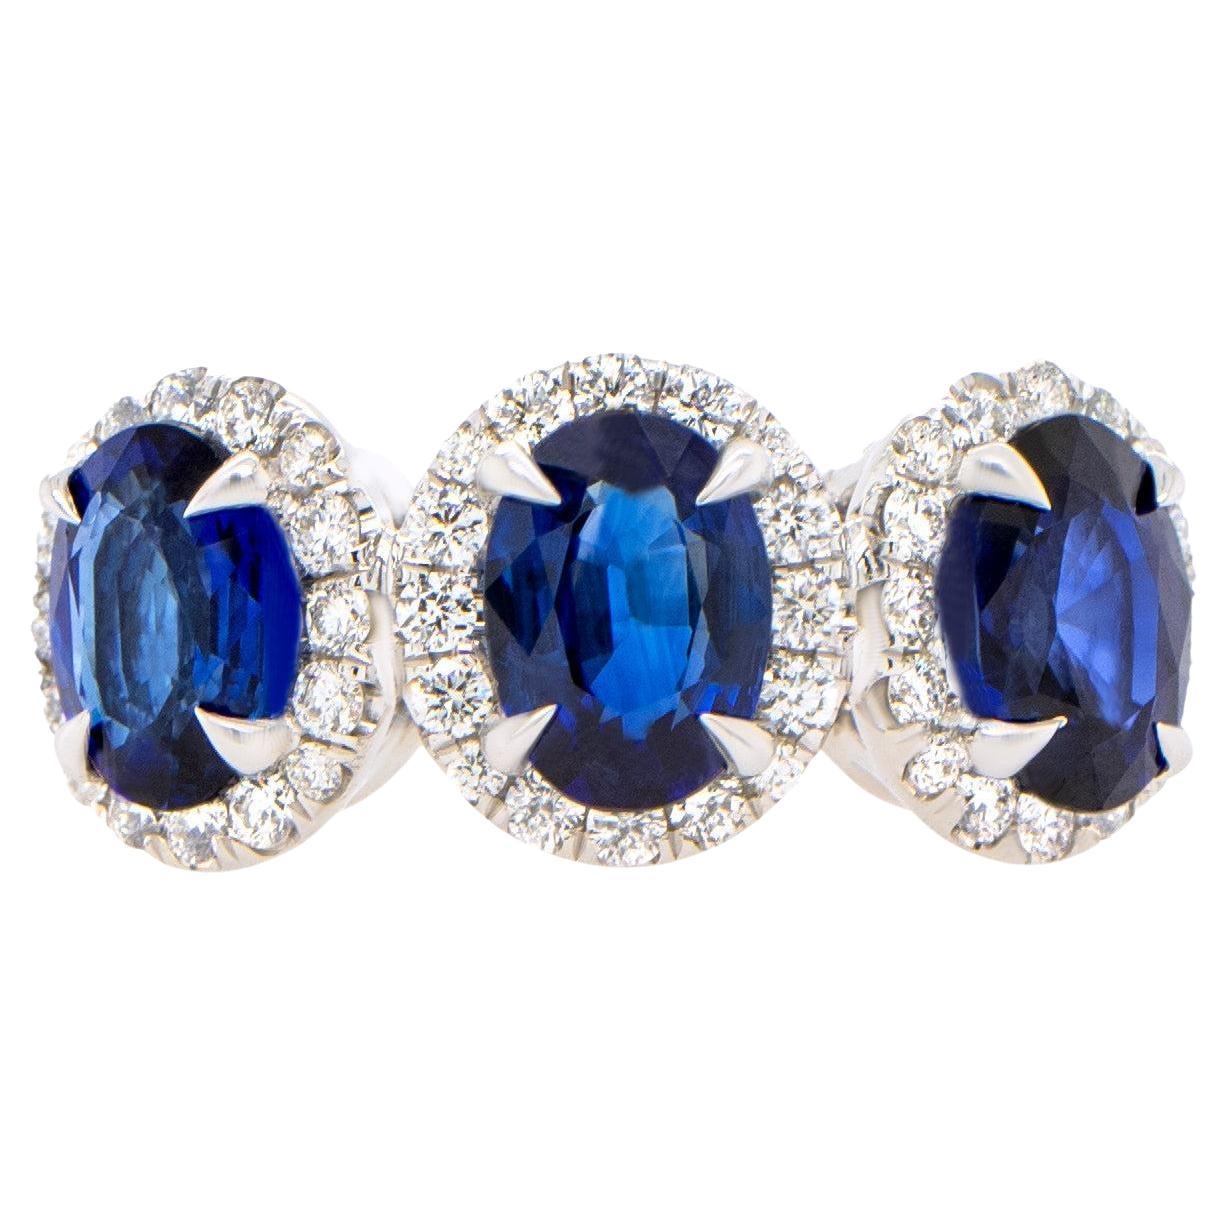 Three Sapphires Ring Diamond Setting 3.80 Carats 18K White Gold For Sale